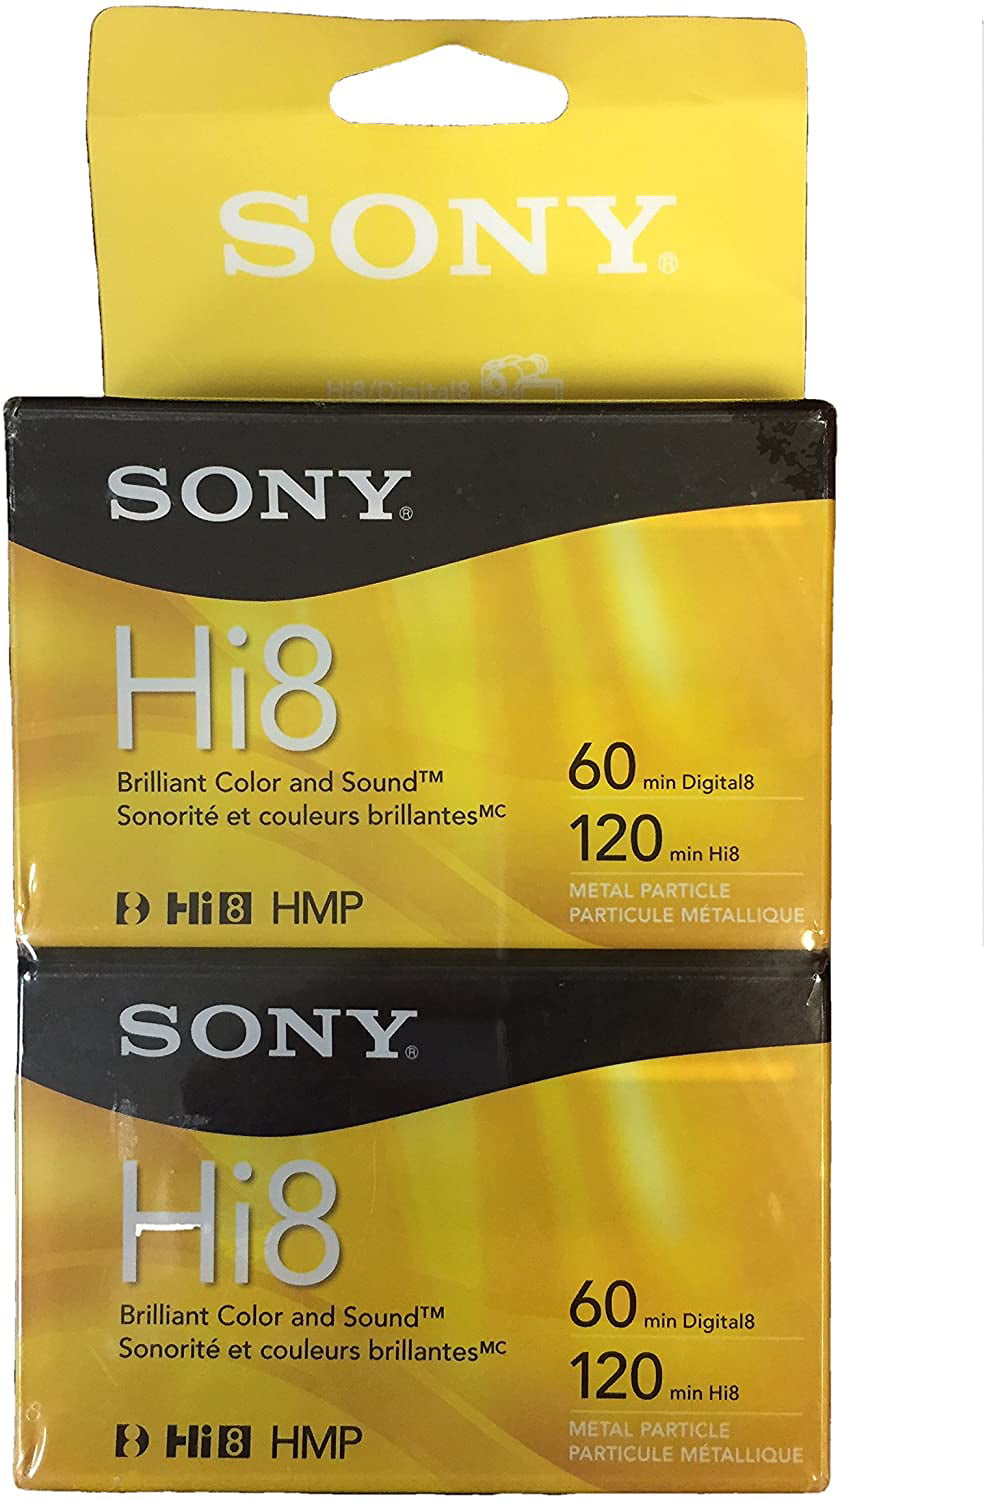 Sony E-6120HMED1 Hi8 Camcorder Cassette Metal Evaporated 120 Minute Single Discontinued by Manufacturer 